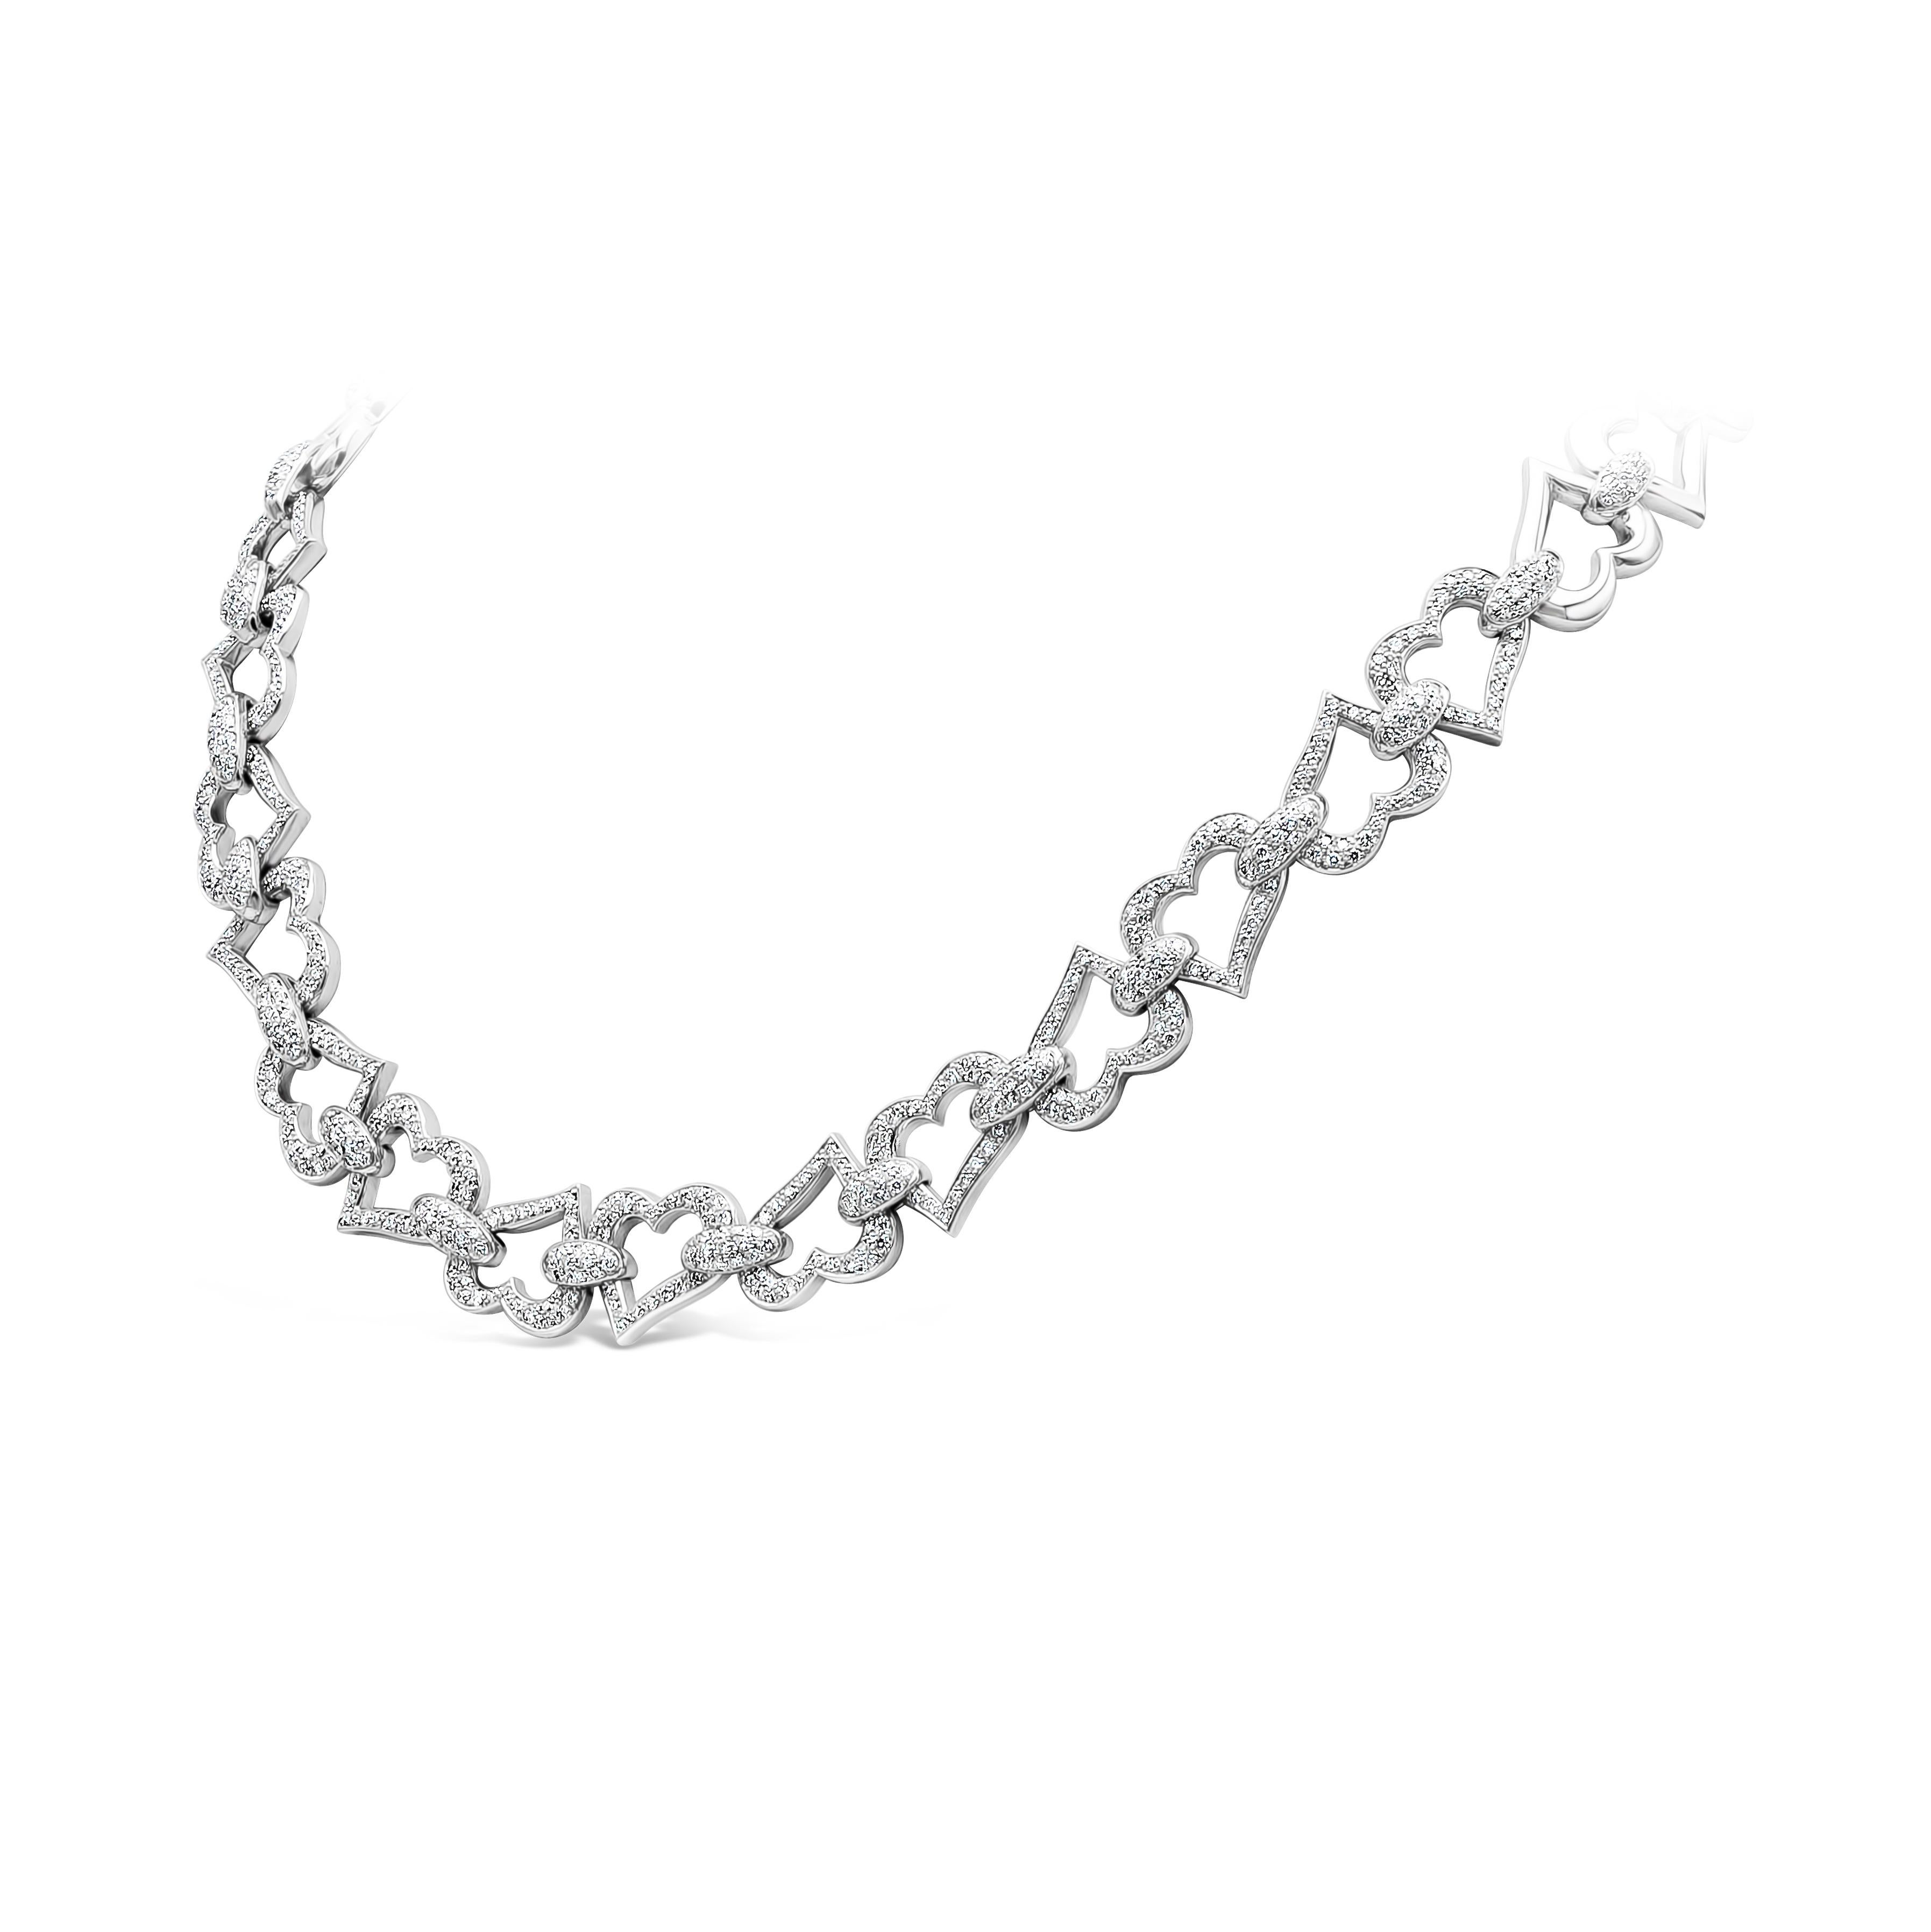 This unique charmingly splendid heart shape link necklace features 653 pieces of round shape diamonds weighing 5.80 carats total, D-F in Color and VVS+ in Clarity. The heart shape diamonds are approximately 0.51 inches wide. Made with 18k Gold.